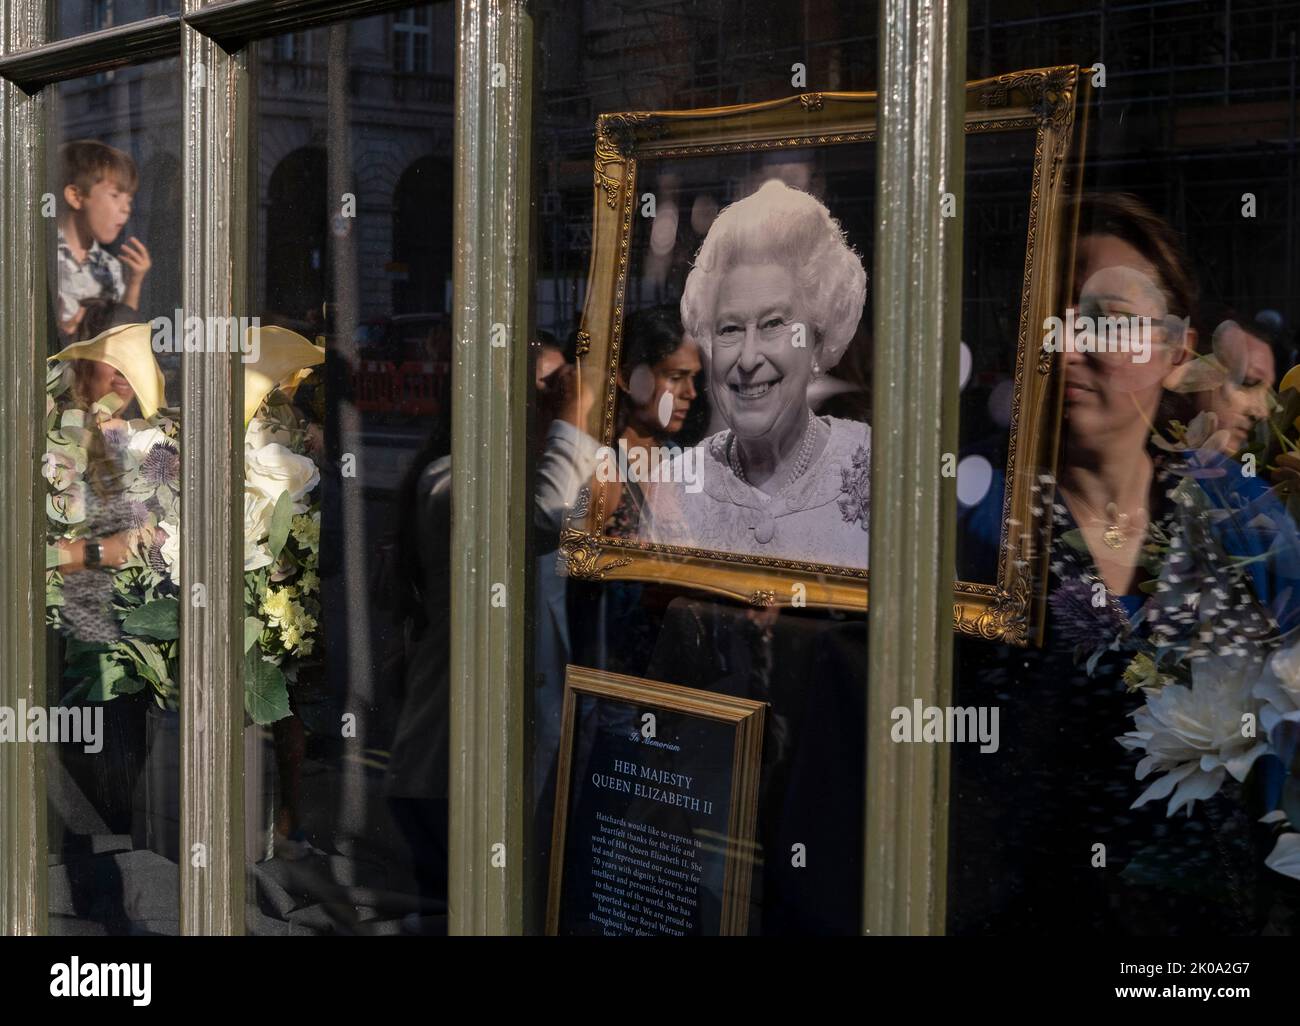 A shop close to  Buckingham Palace displays a photograph in memory of  Queen Elizabeth II   Members of the public gather to lay flowers in green park Stock Photo